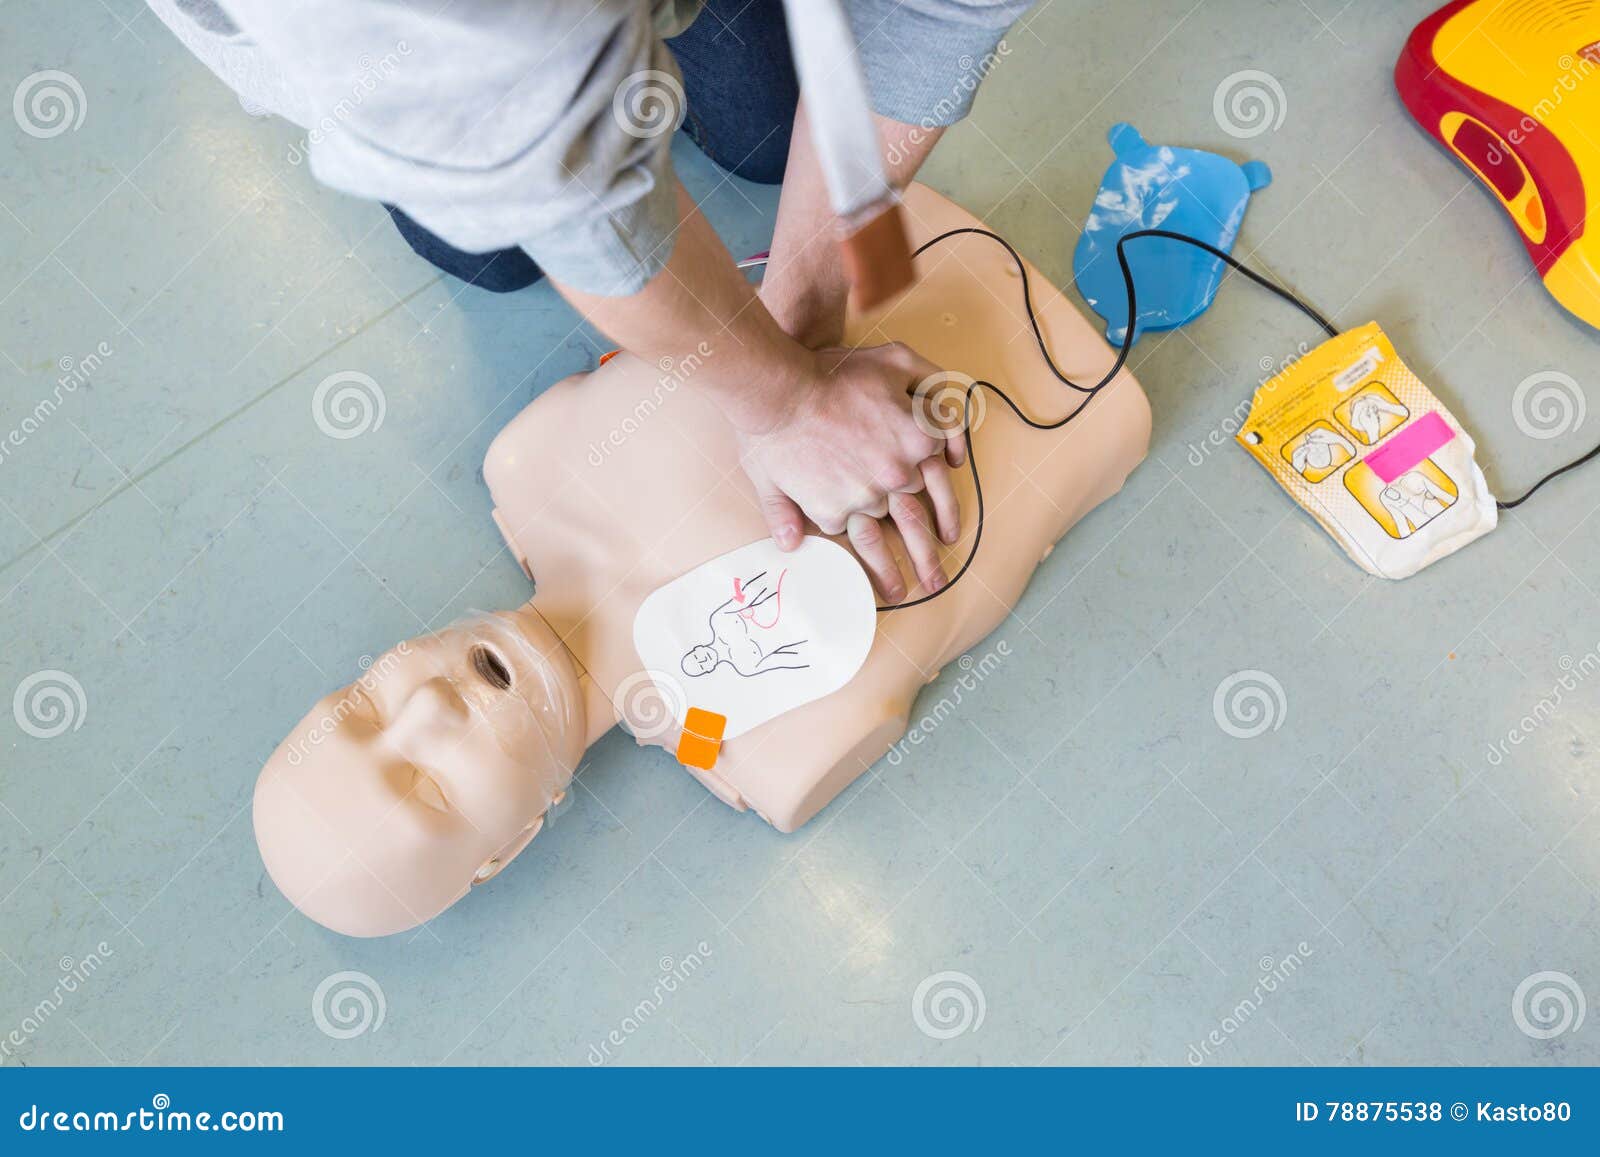 first aid resuscitation course using aed.